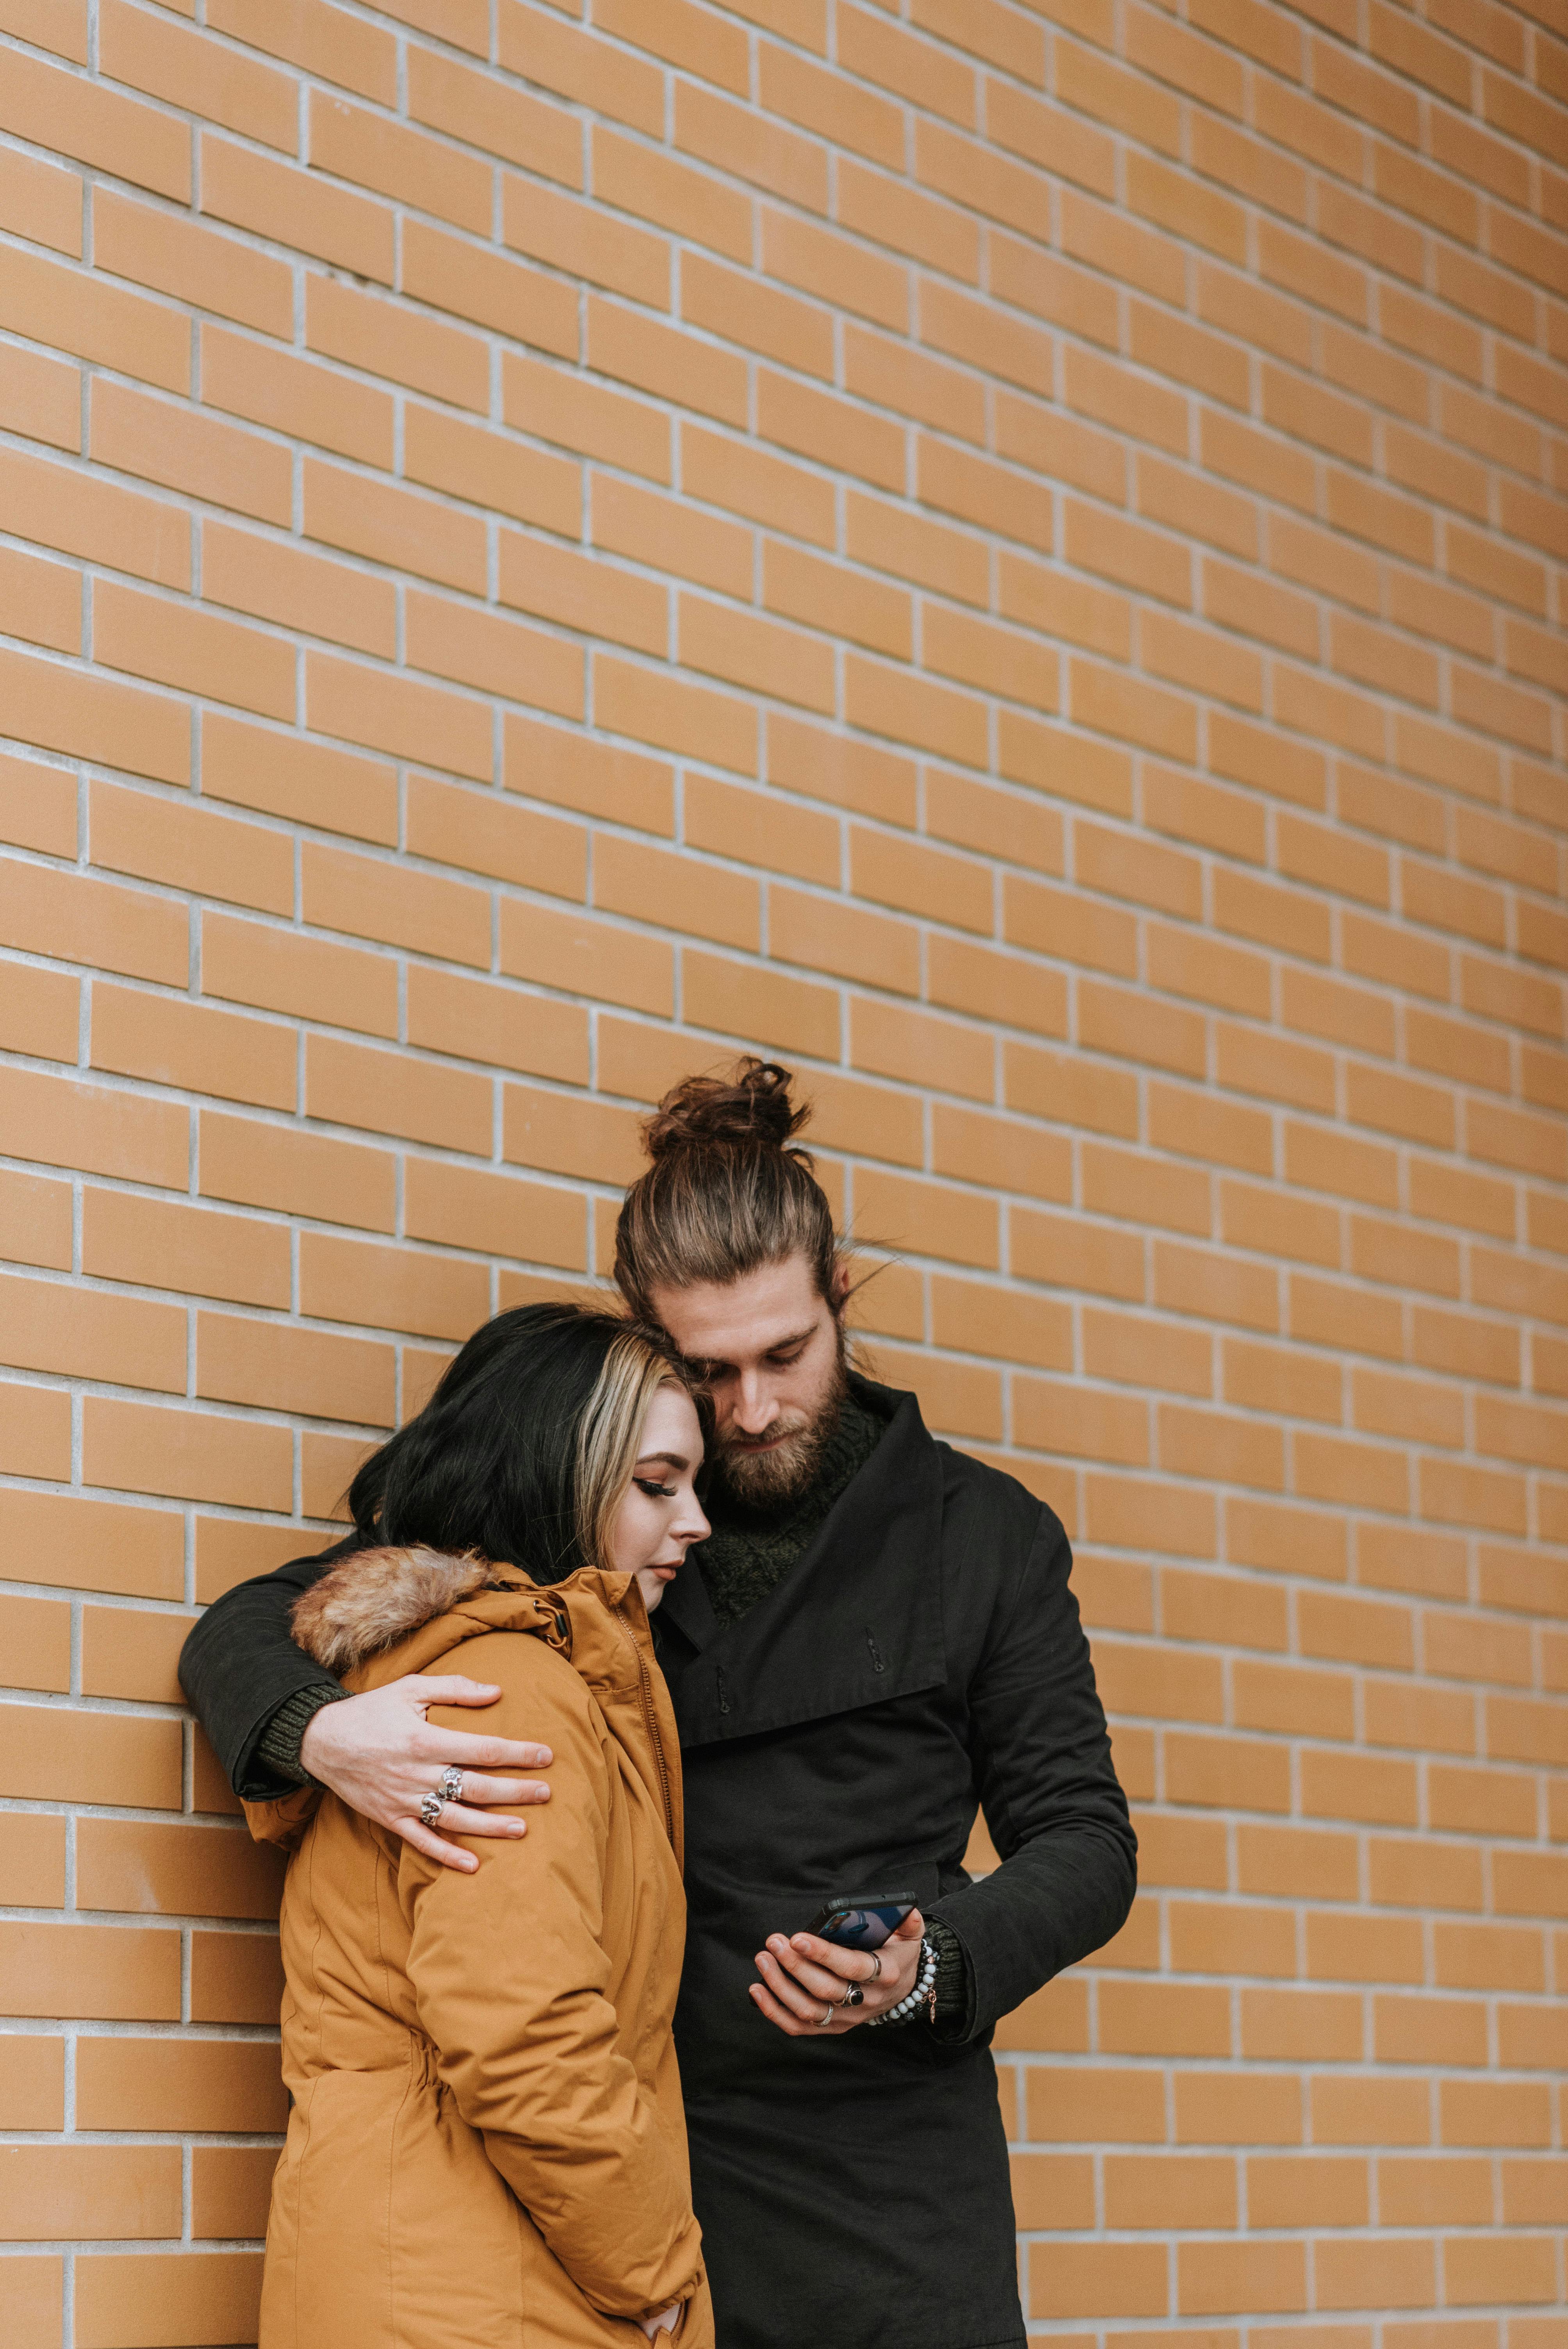 young couple embracing and sharing smartphone near brick building